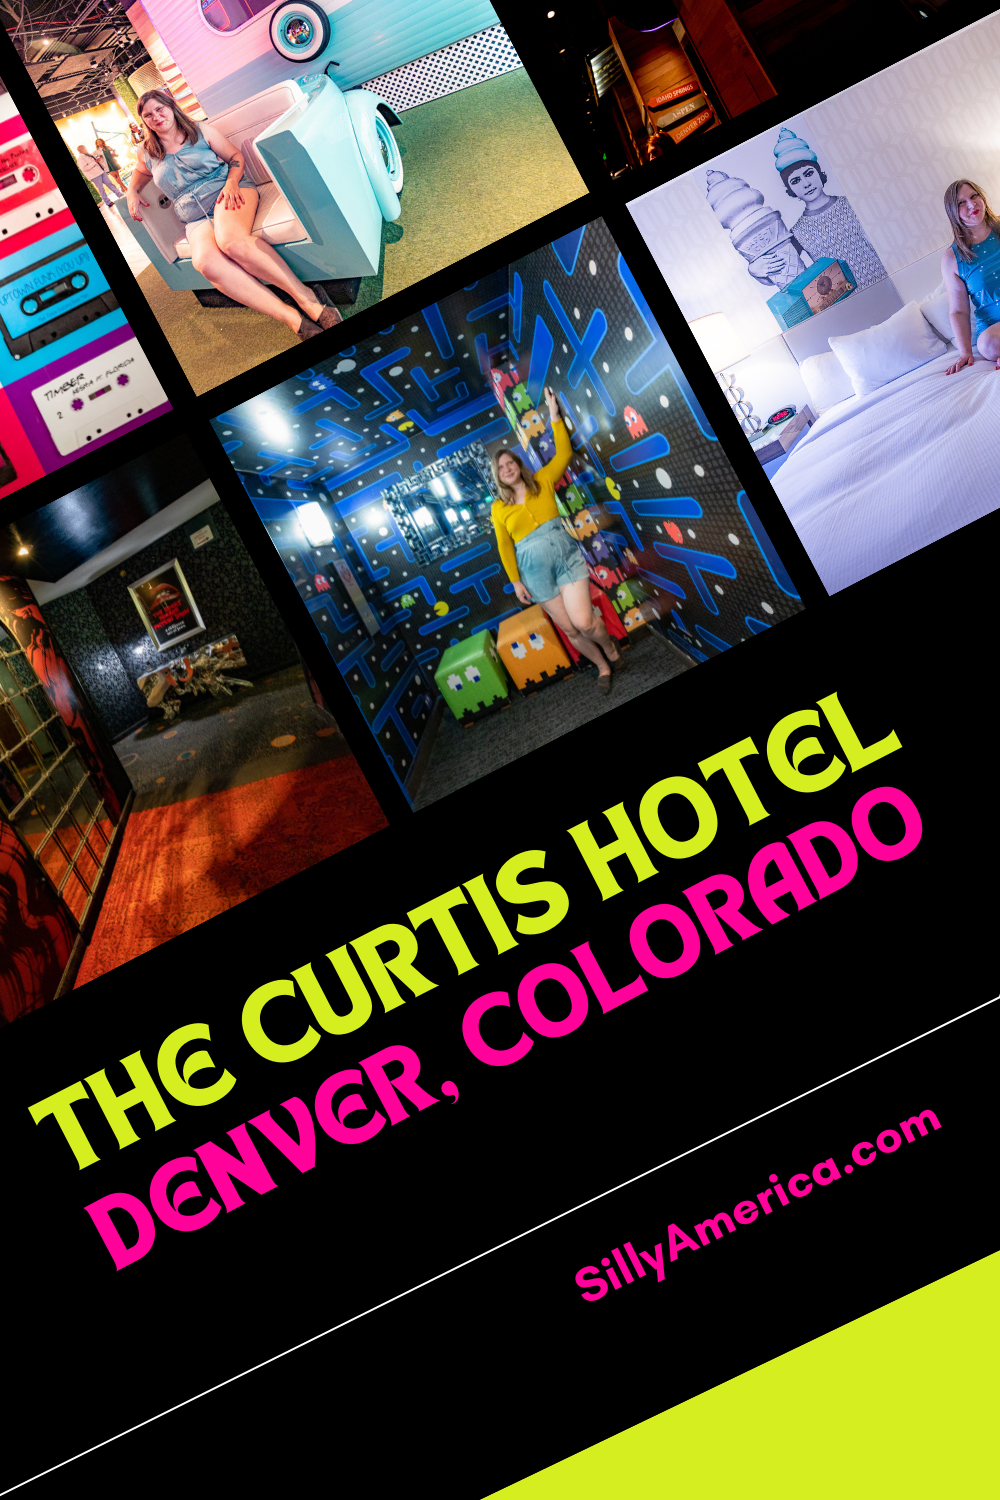 Life is too short to stay at boring hotels. The Curtis Hotel in Denver, Colorado is a themed-hotel with an Instagram-worthy set up at every turn. With themes and rooms based on Marvel Superheros, Sci-Fi Star Trek, and PacMan it's a fun stay in a renovated retro hotel. Stay at the Denver Boutique hotel on your Colorado vacation. #RoadTrip #ColoradoRoadTrip #Denver #DenverRoadTrip #DenverHotel #BoutiqueHotel #DenverBoutiqueHotel